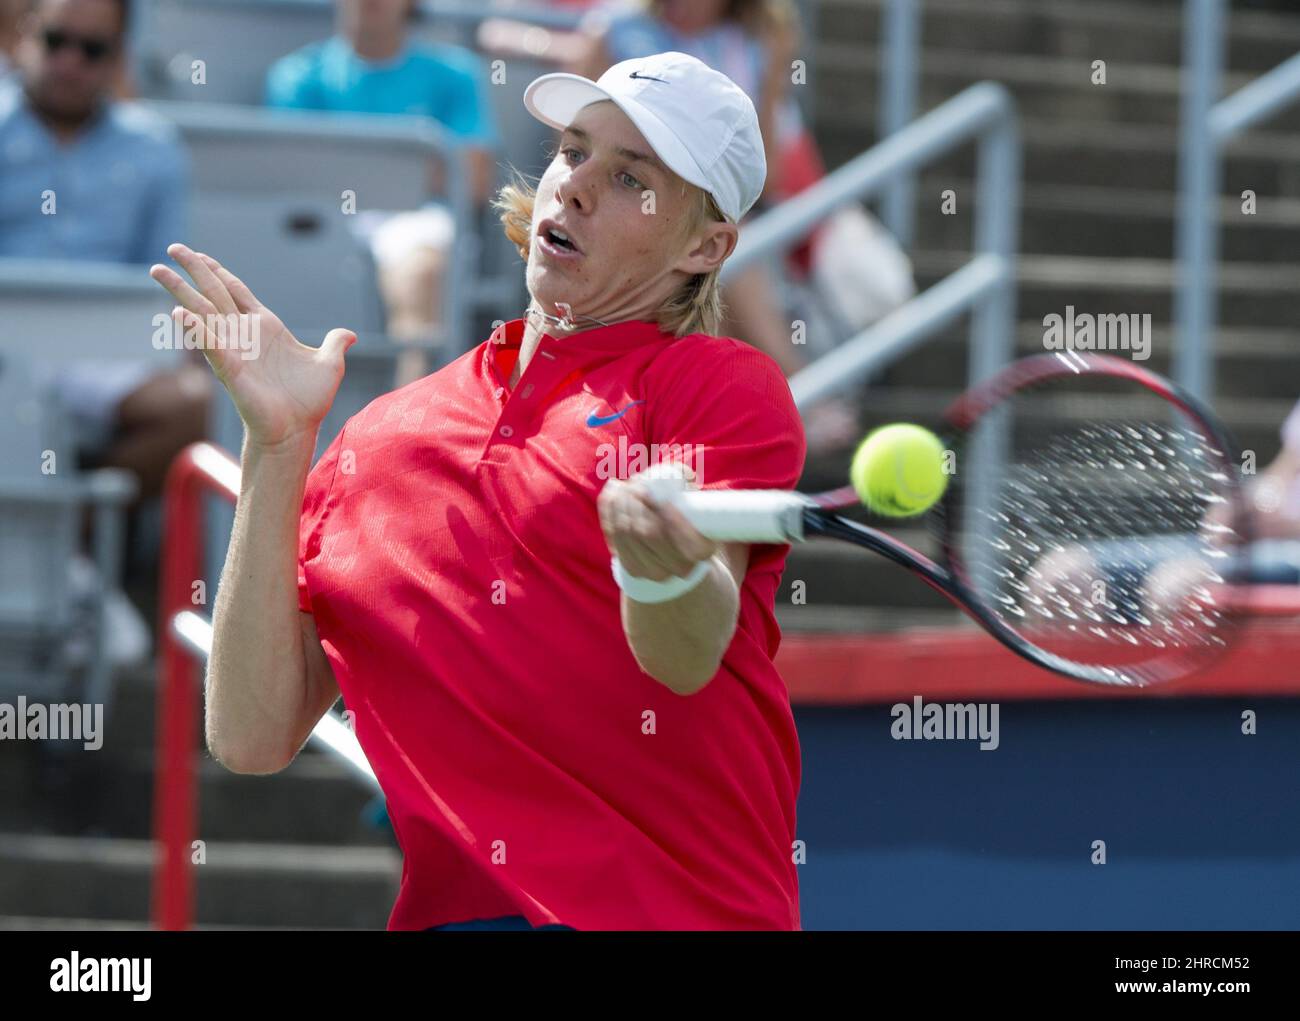 Denis Shapovalov of Canada returns to Rogerio Dutra Silva of Brazil during first round of play at the Rogers Cup tennis tournament Tuesday August 8, 2017 in Montreal. THE CANADIAN PRESS/Paul Chiasson Stock Photo